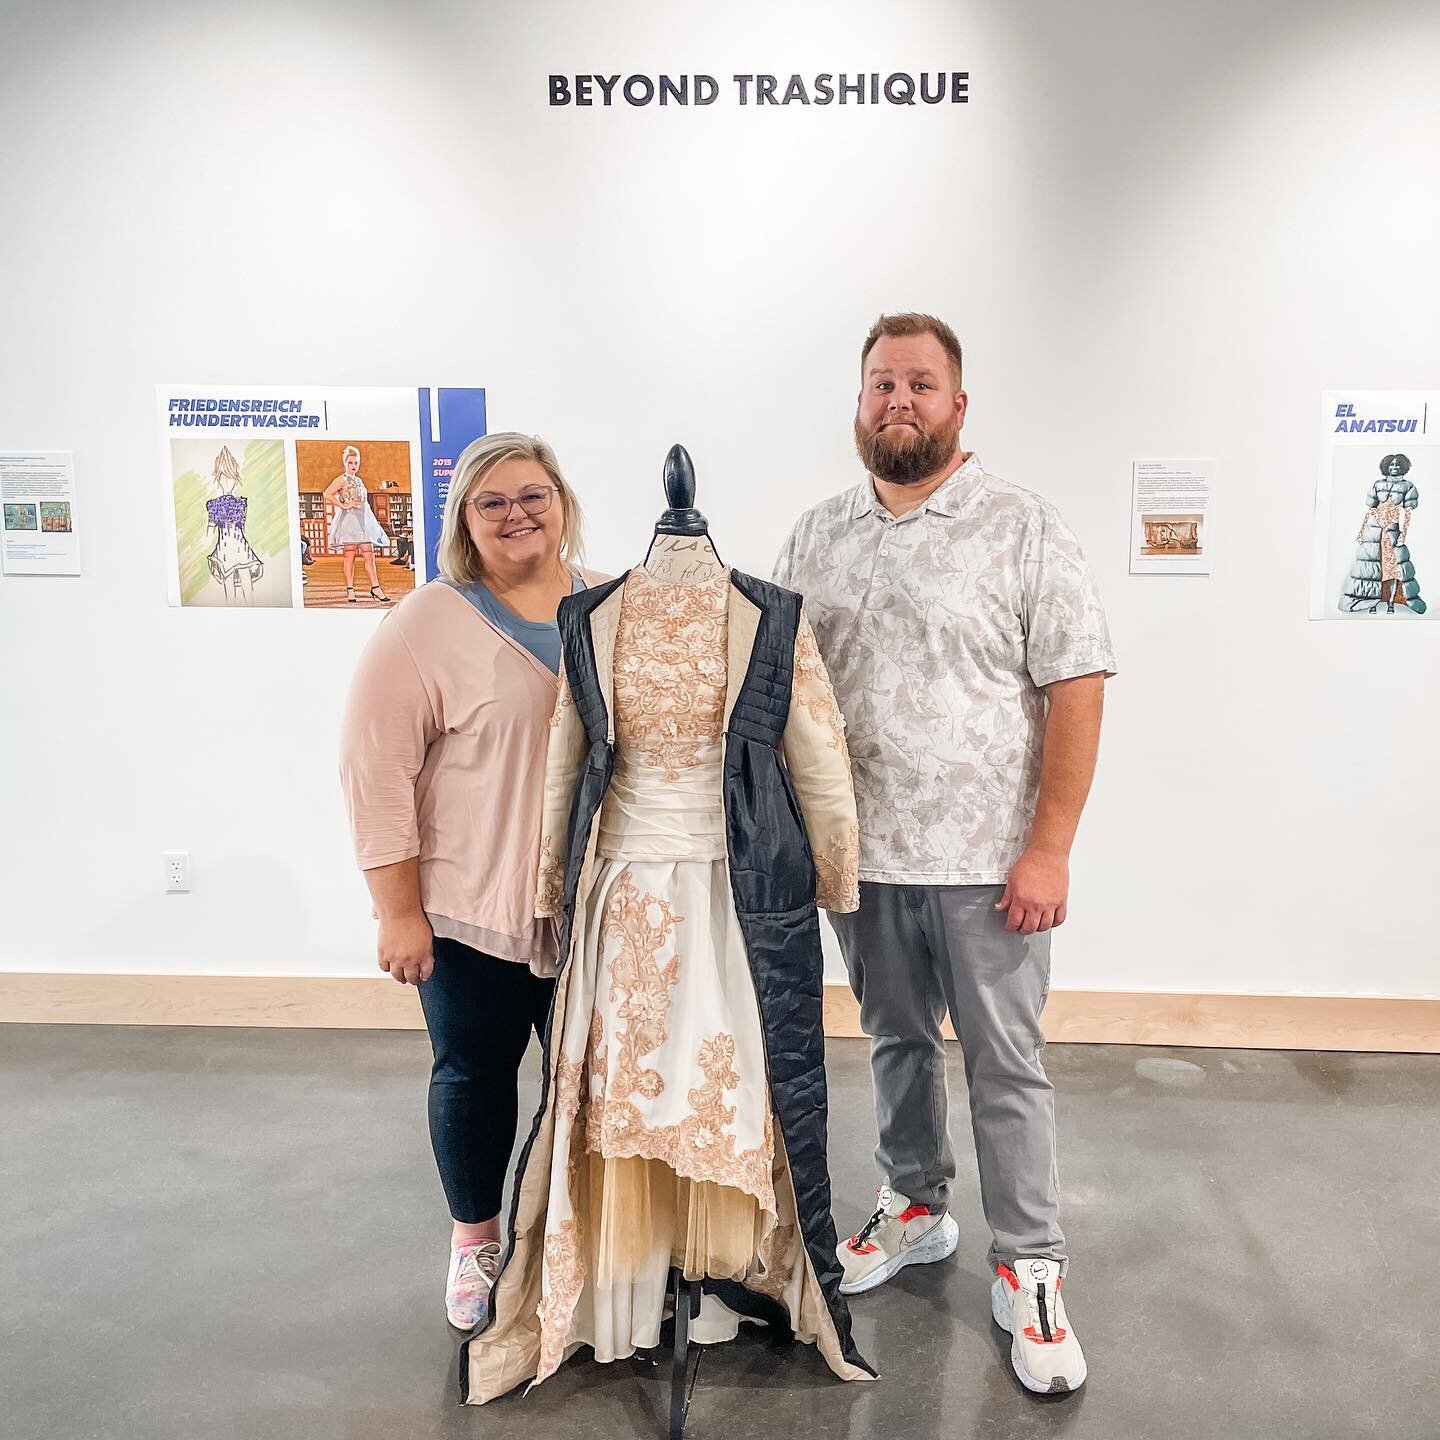 Reminiscing about our Beyond Trashique opening reception! This is my first show that has had the most media buzz and i can&rsquo;t thank those who came enough. 
&mdash;
#trashique #beyondtrashique #fpuart #fpuartdept #fpuvpa #fresnopacific #fresnopac